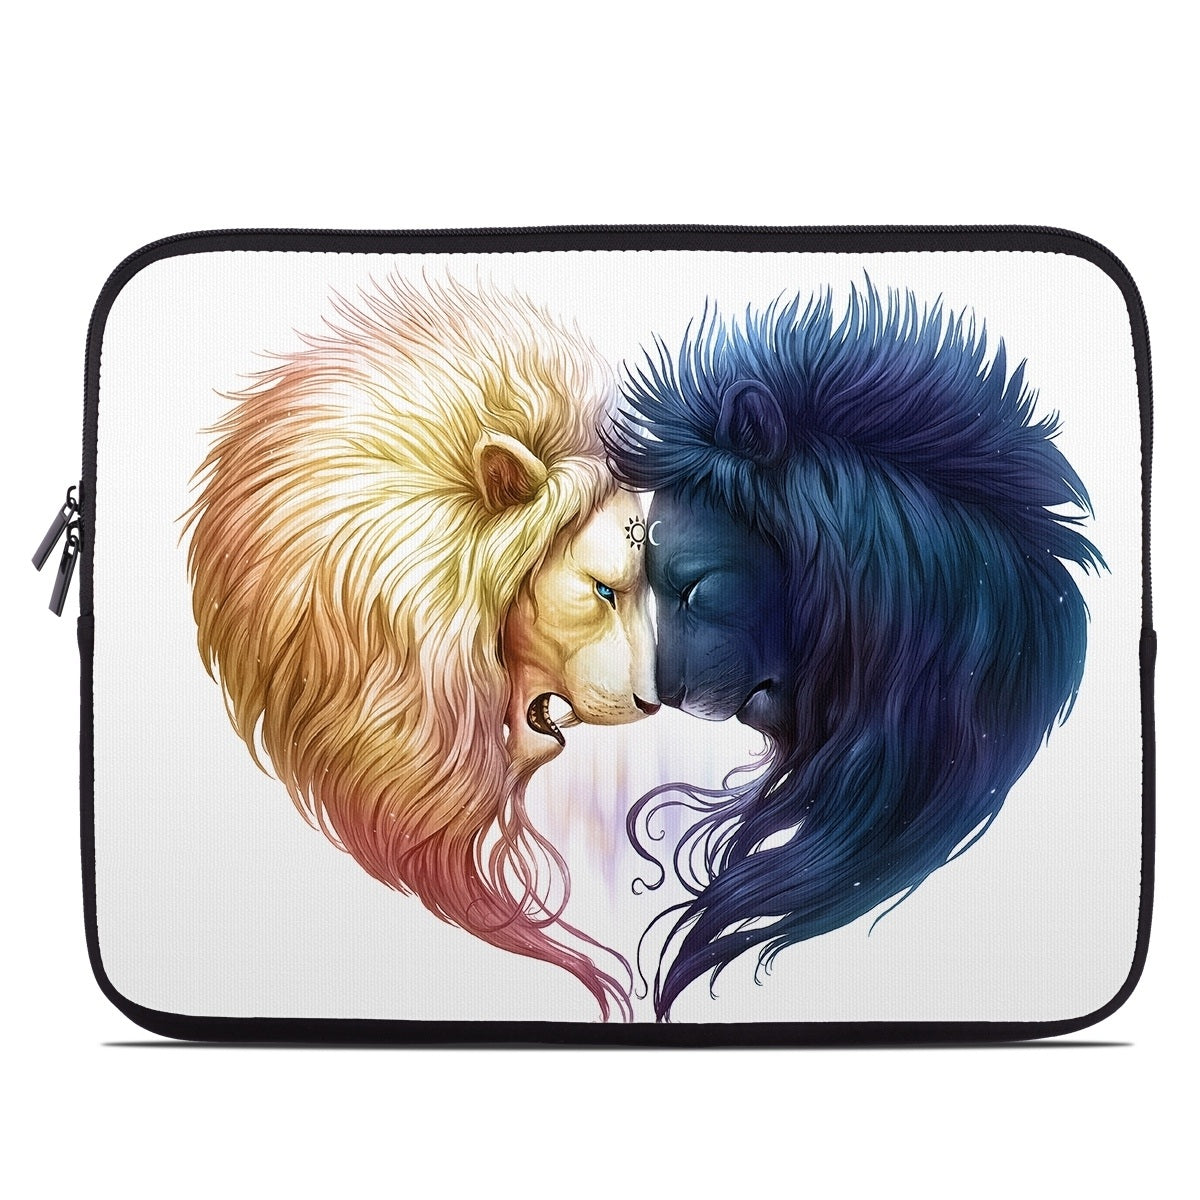 Day And Night - Laptop Sleeve